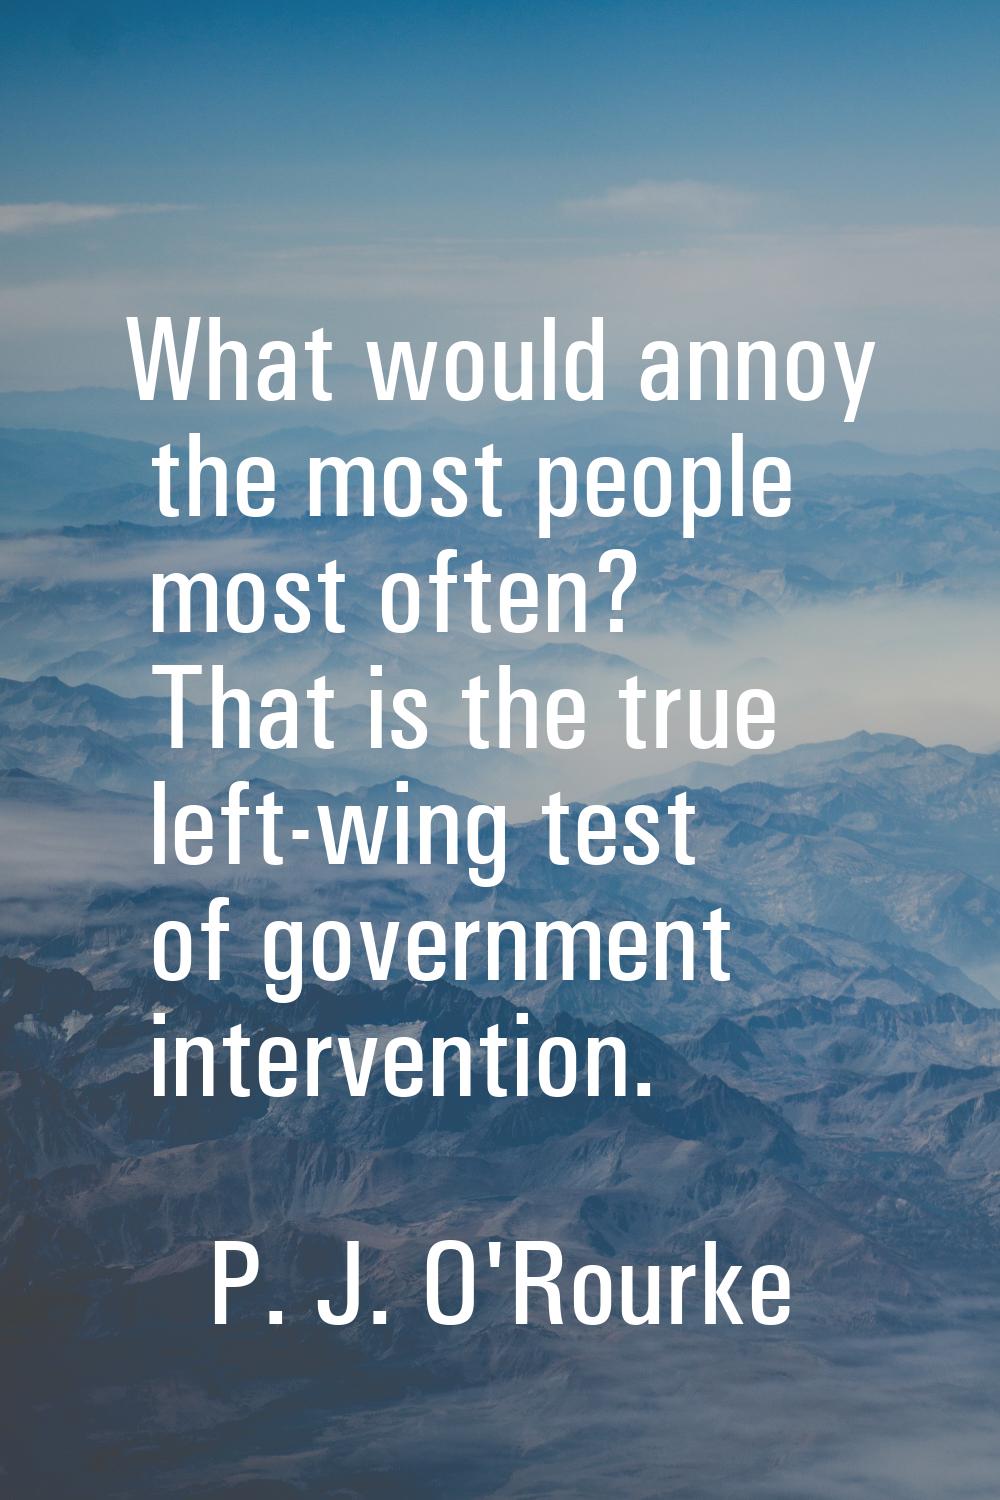 What would annoy the most people most often? That is the true left-wing test of government interven